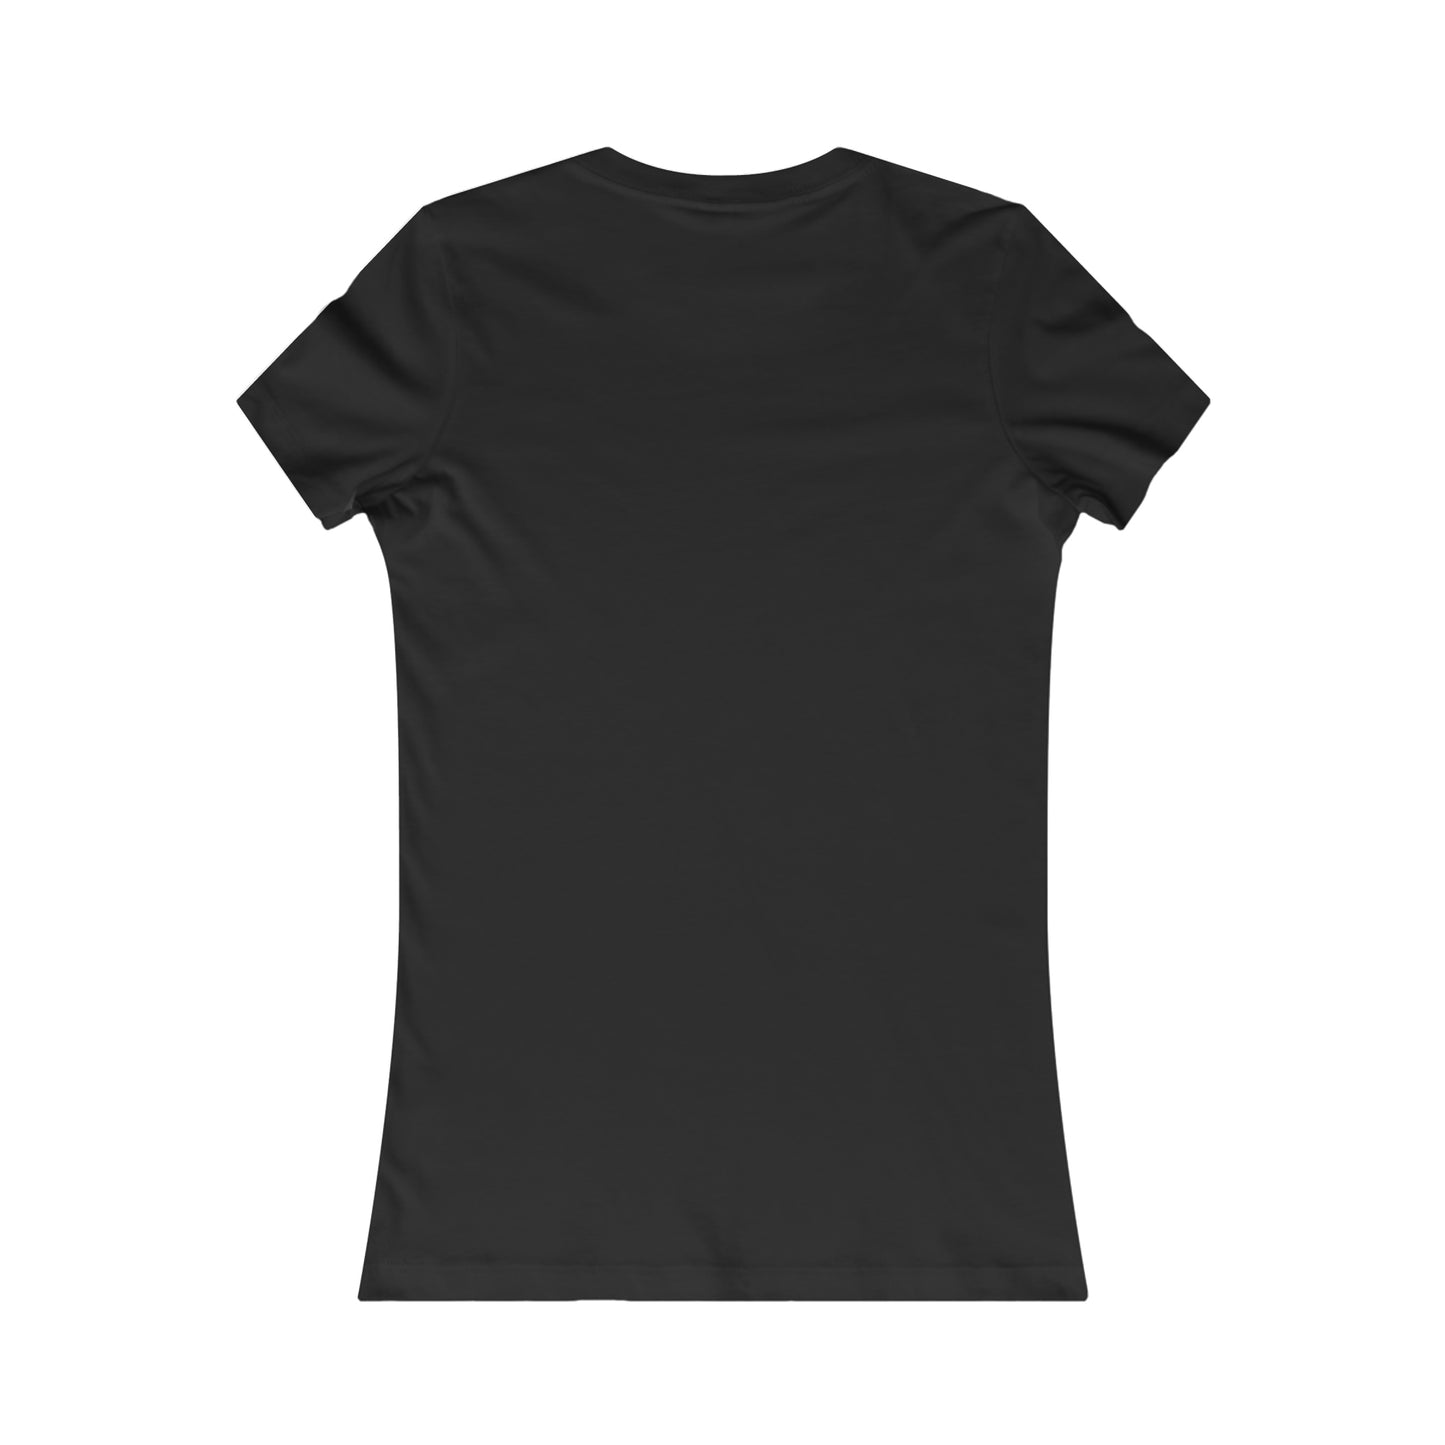 Women's Oly Concepts Tee